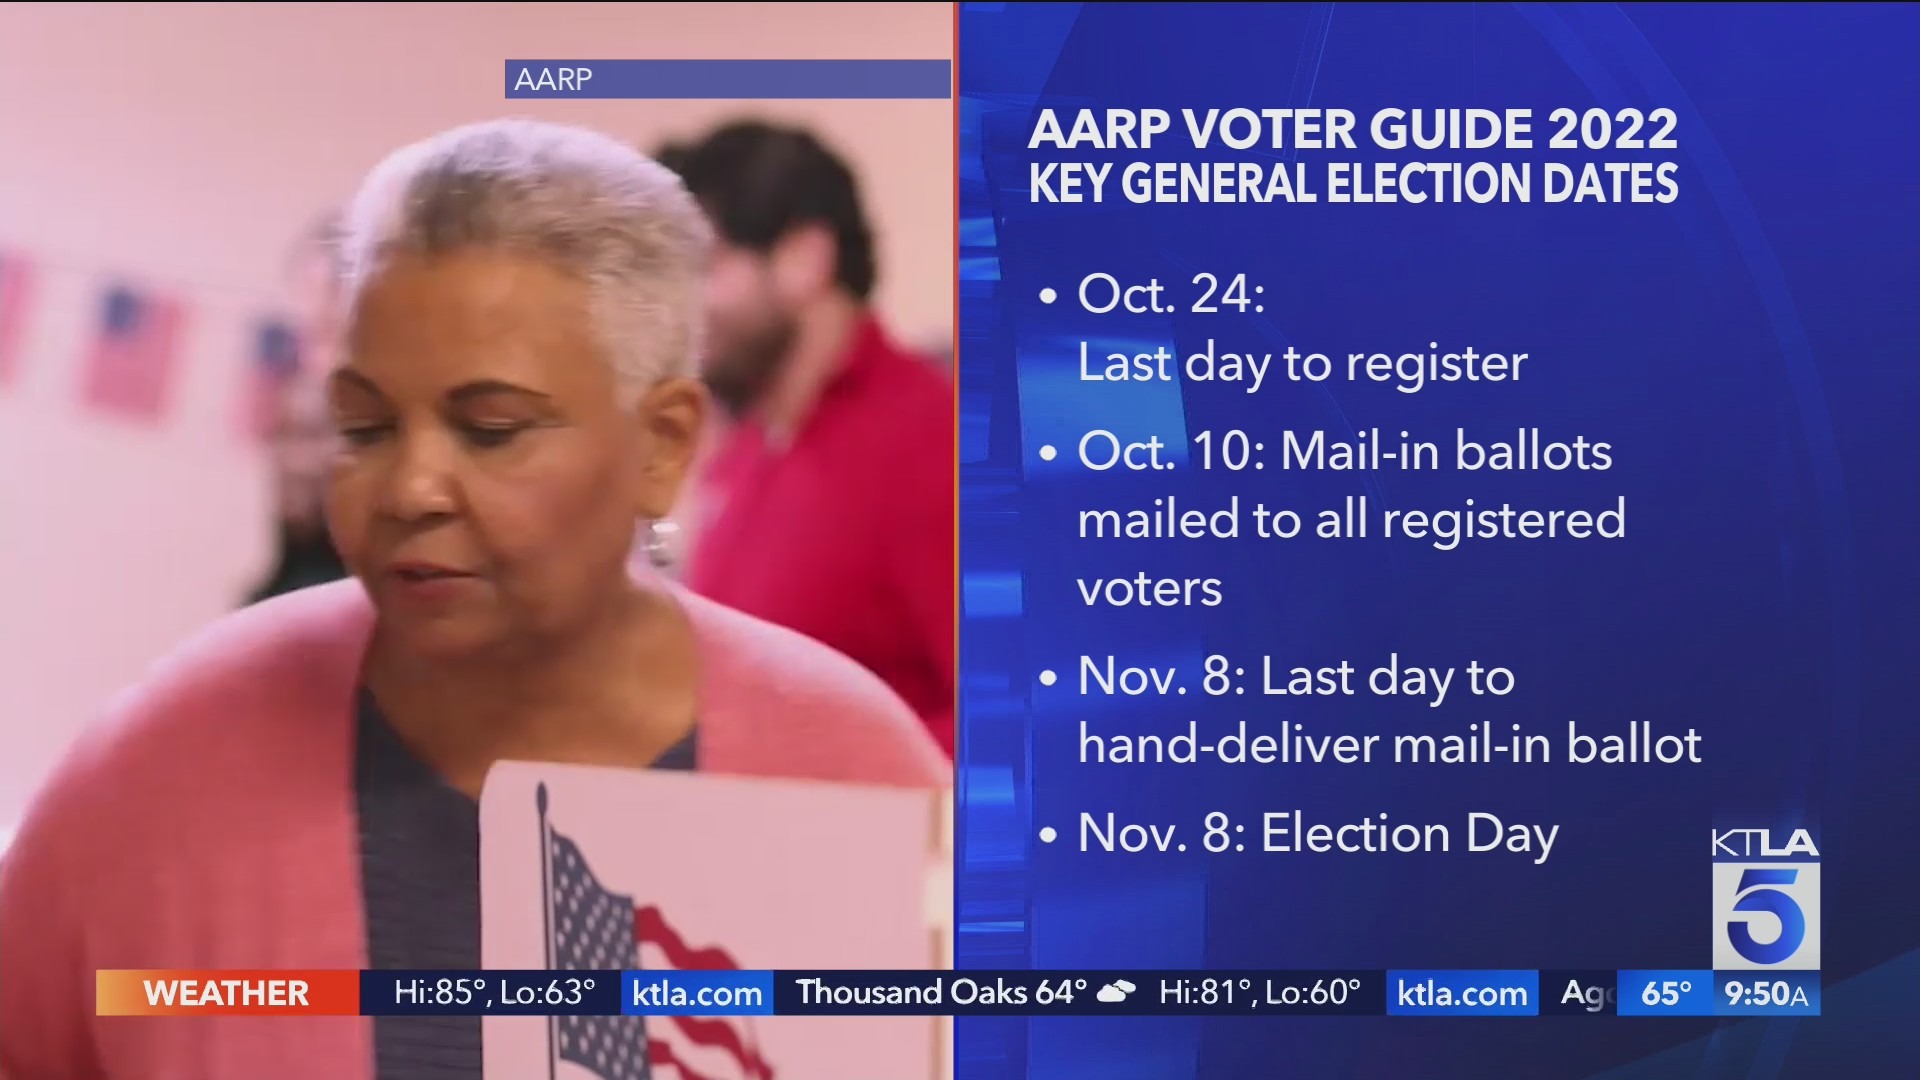 AARP offers voter guide resources ahead of Nov. 8 election